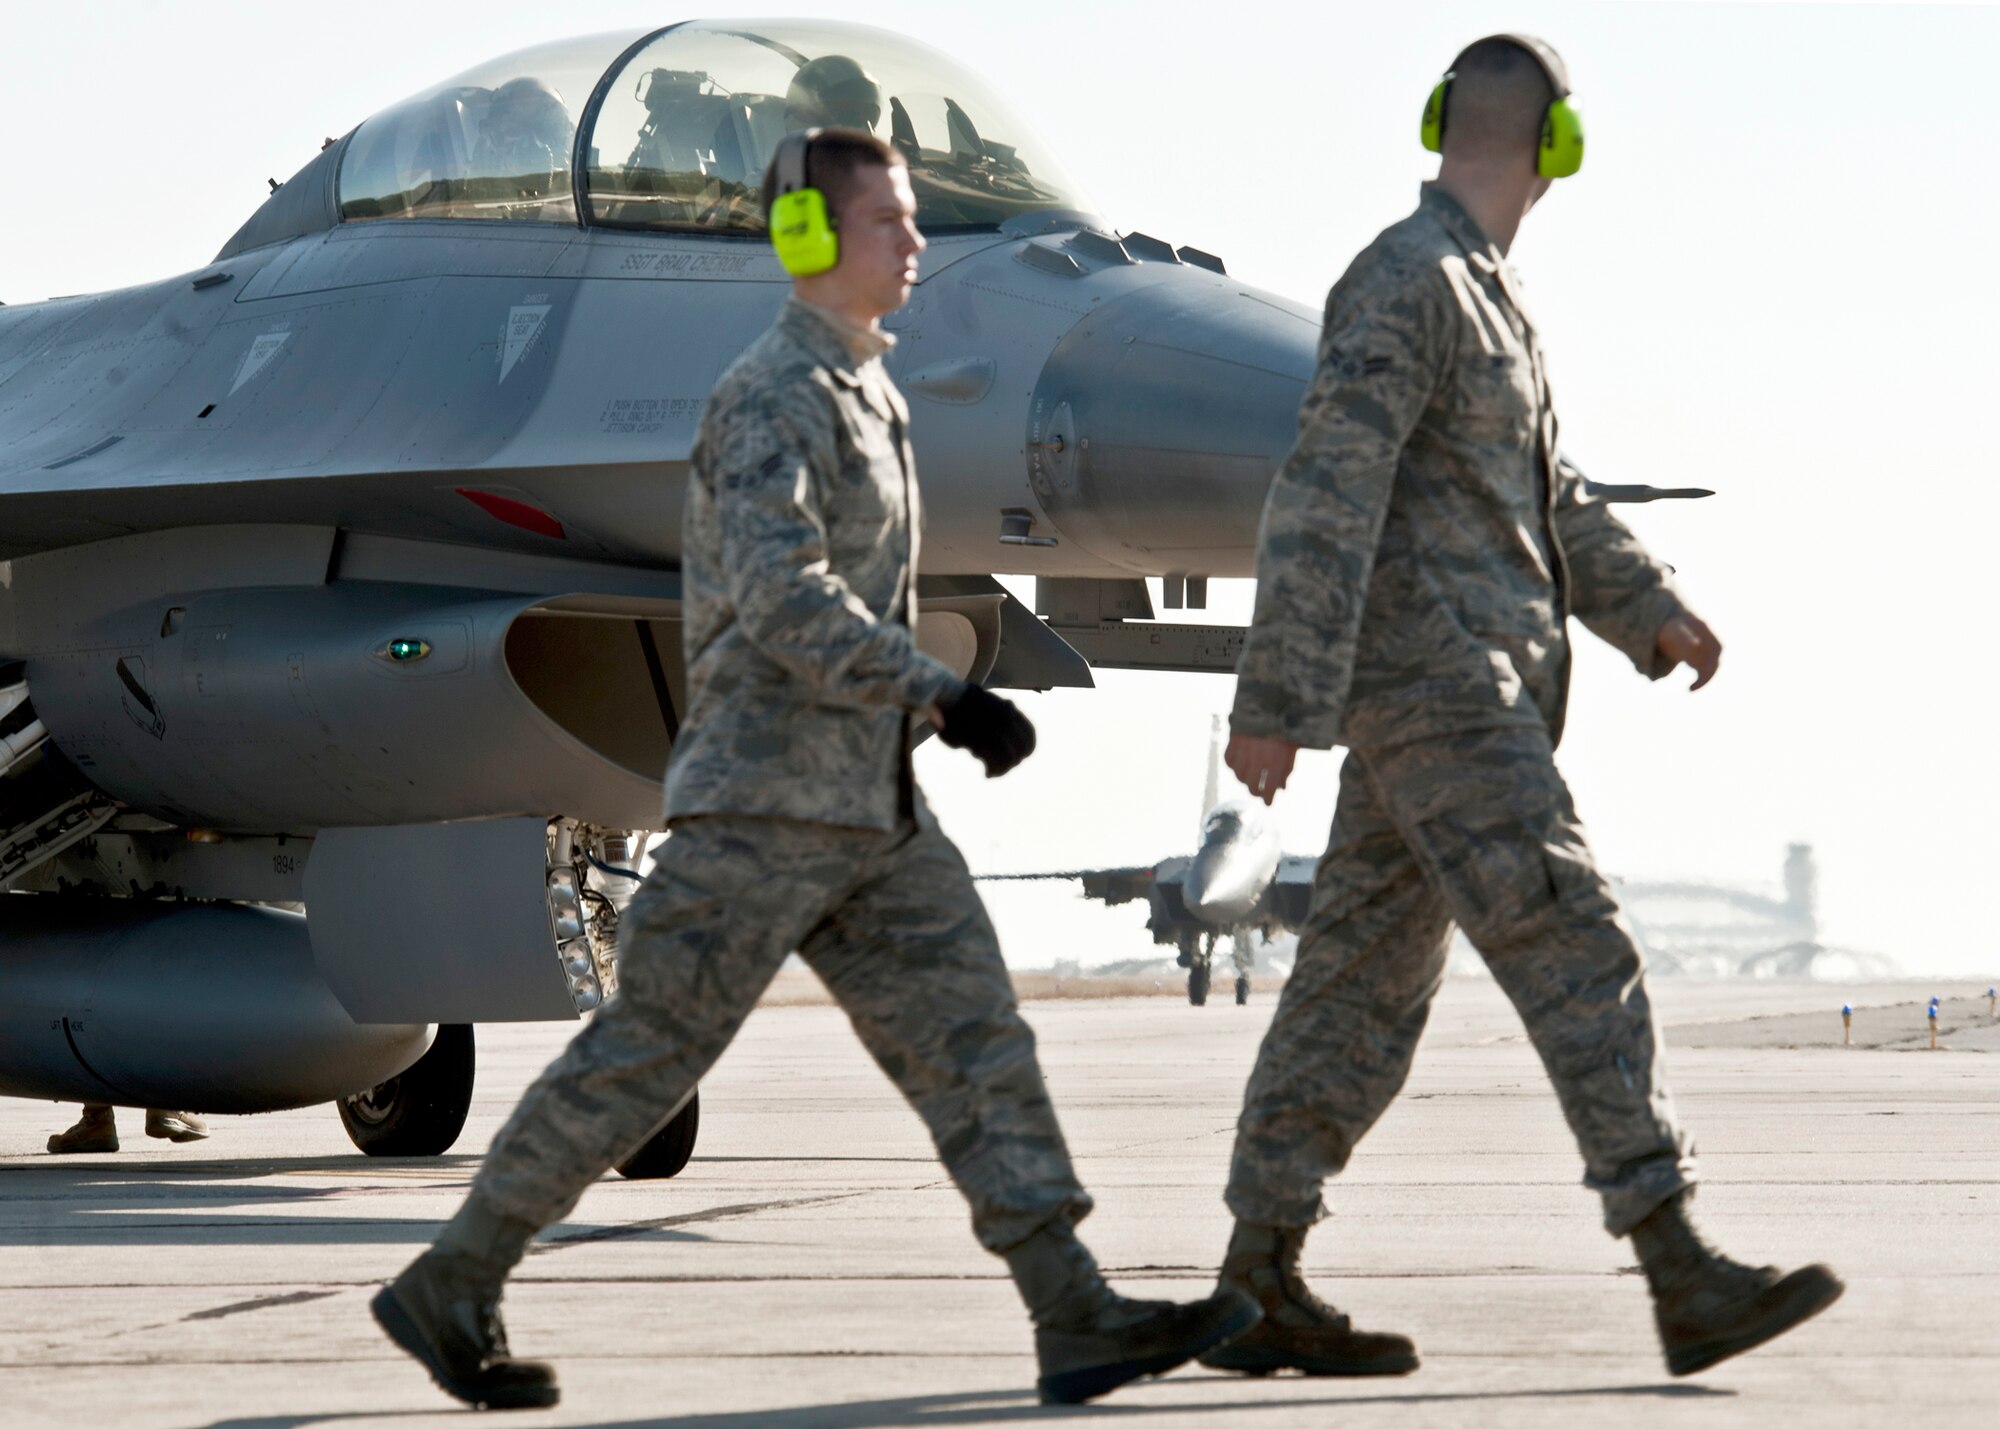 F-15E Strike Eagle maintainers walk past a parked F-16 Fighting Falcon to move into place as their aircraft taxis toward them for a final check before takeoff Jan. 18, 2011, from Eglin Air Force Base, Fla. This F-15E is equipped with the new APG-82 radar, which replaces the 24-year-old APG-70 radar system. Maintainers are assigned to the 46th Maintenance Group. (U.S. Air Force photo/Samuel King Jr.)